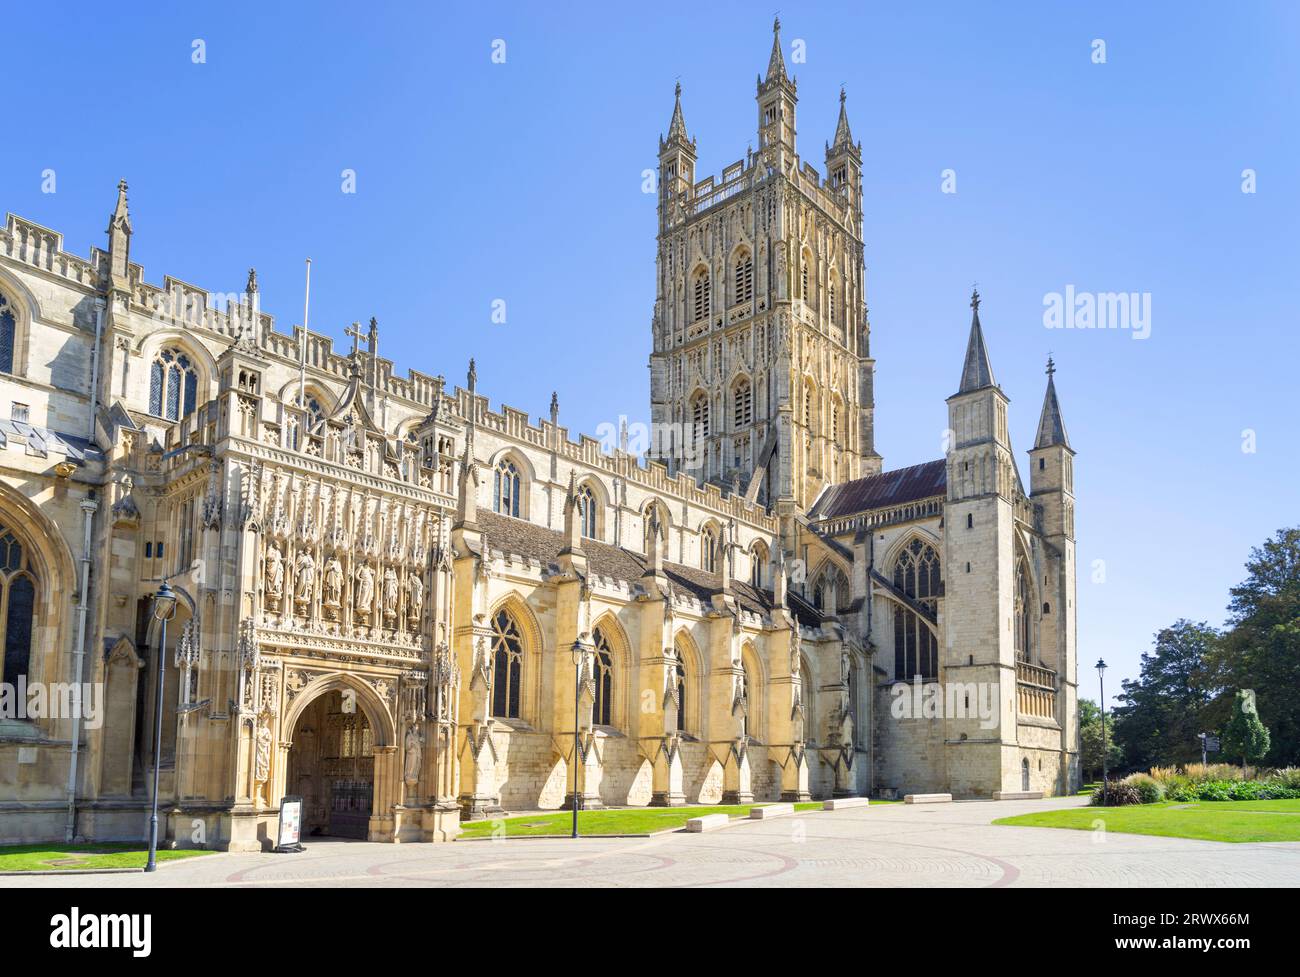 Gloucester cathedral or Cathedral Church of St Peter and the Holy and Indivisible Trinity Gloucester Gloucestershire England UK GB Europe Stock Photo